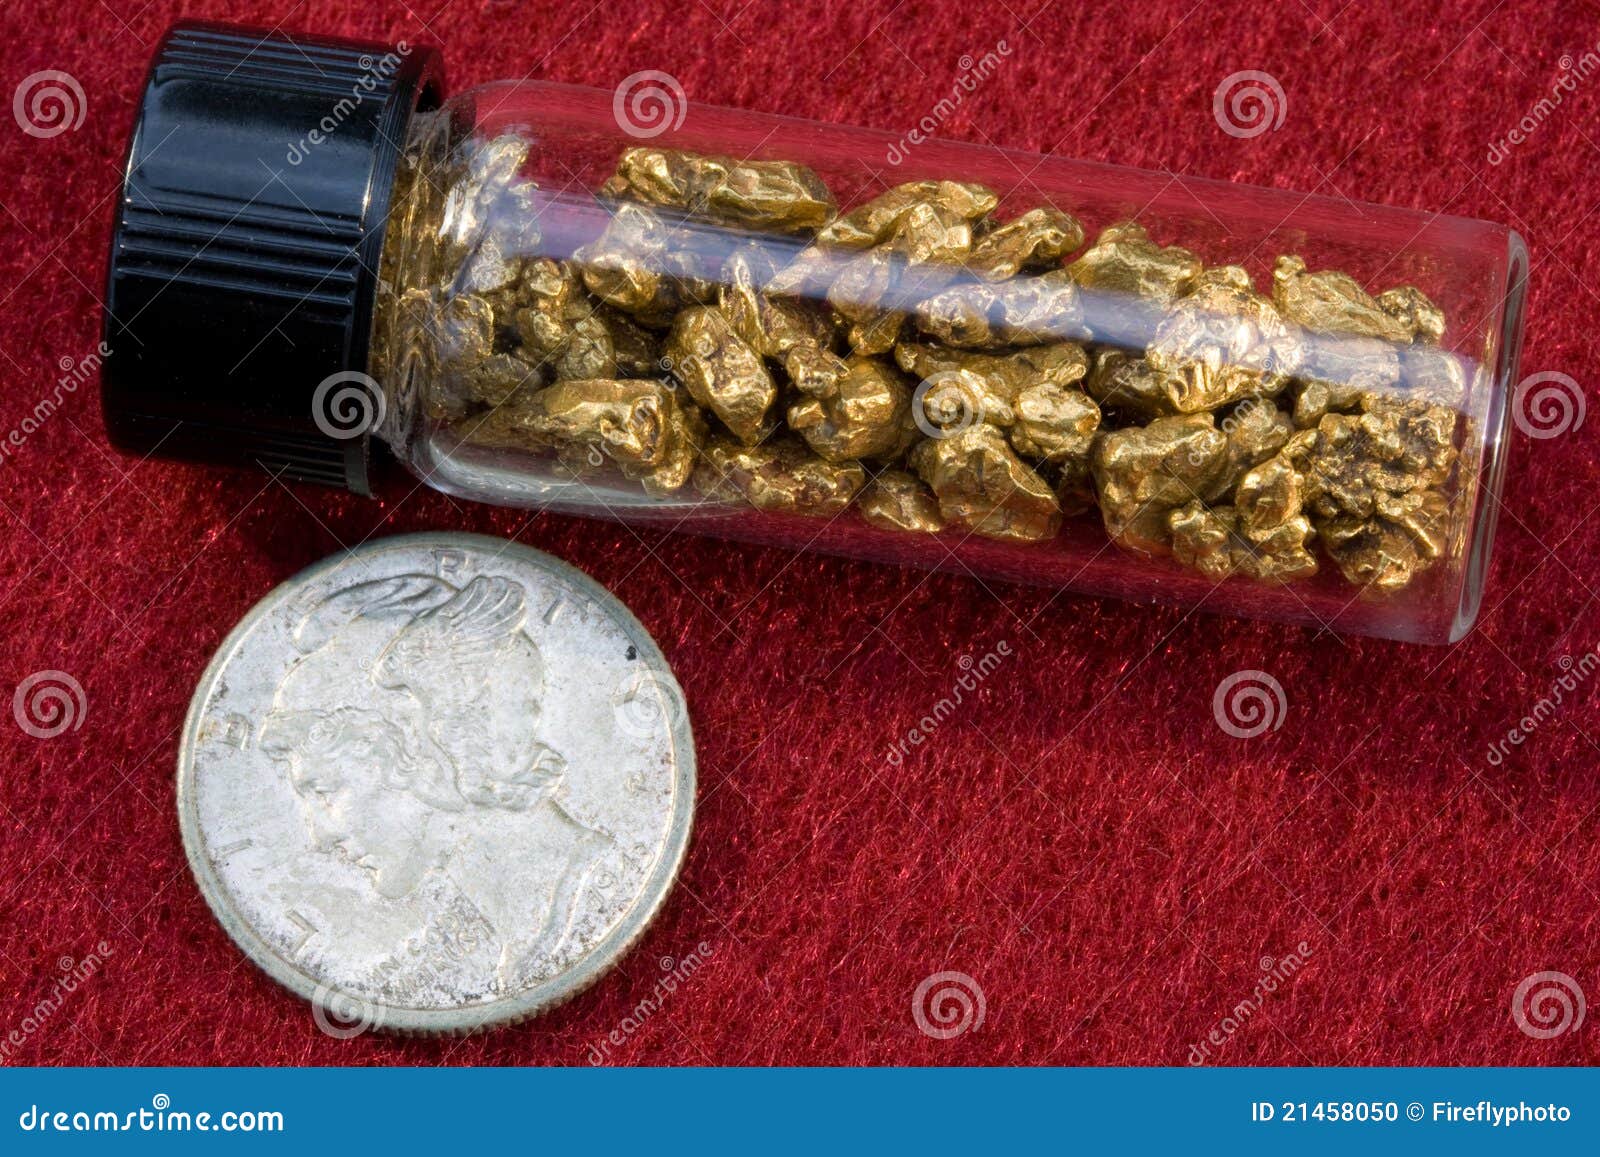 idaho placer gold nuggets